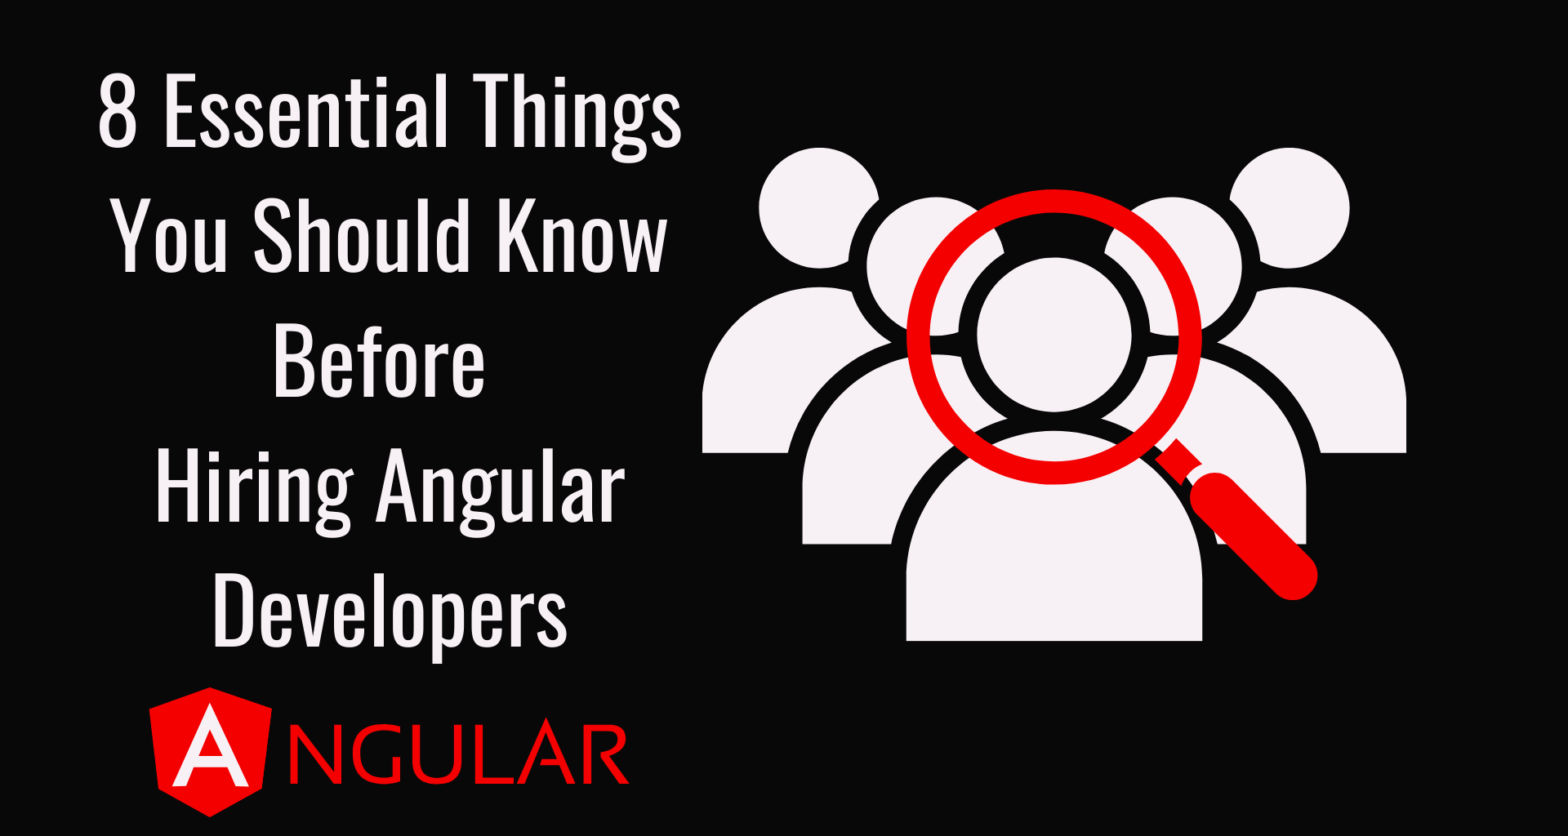 8 Essential Things You Should Know Before Hiring Angular Developers